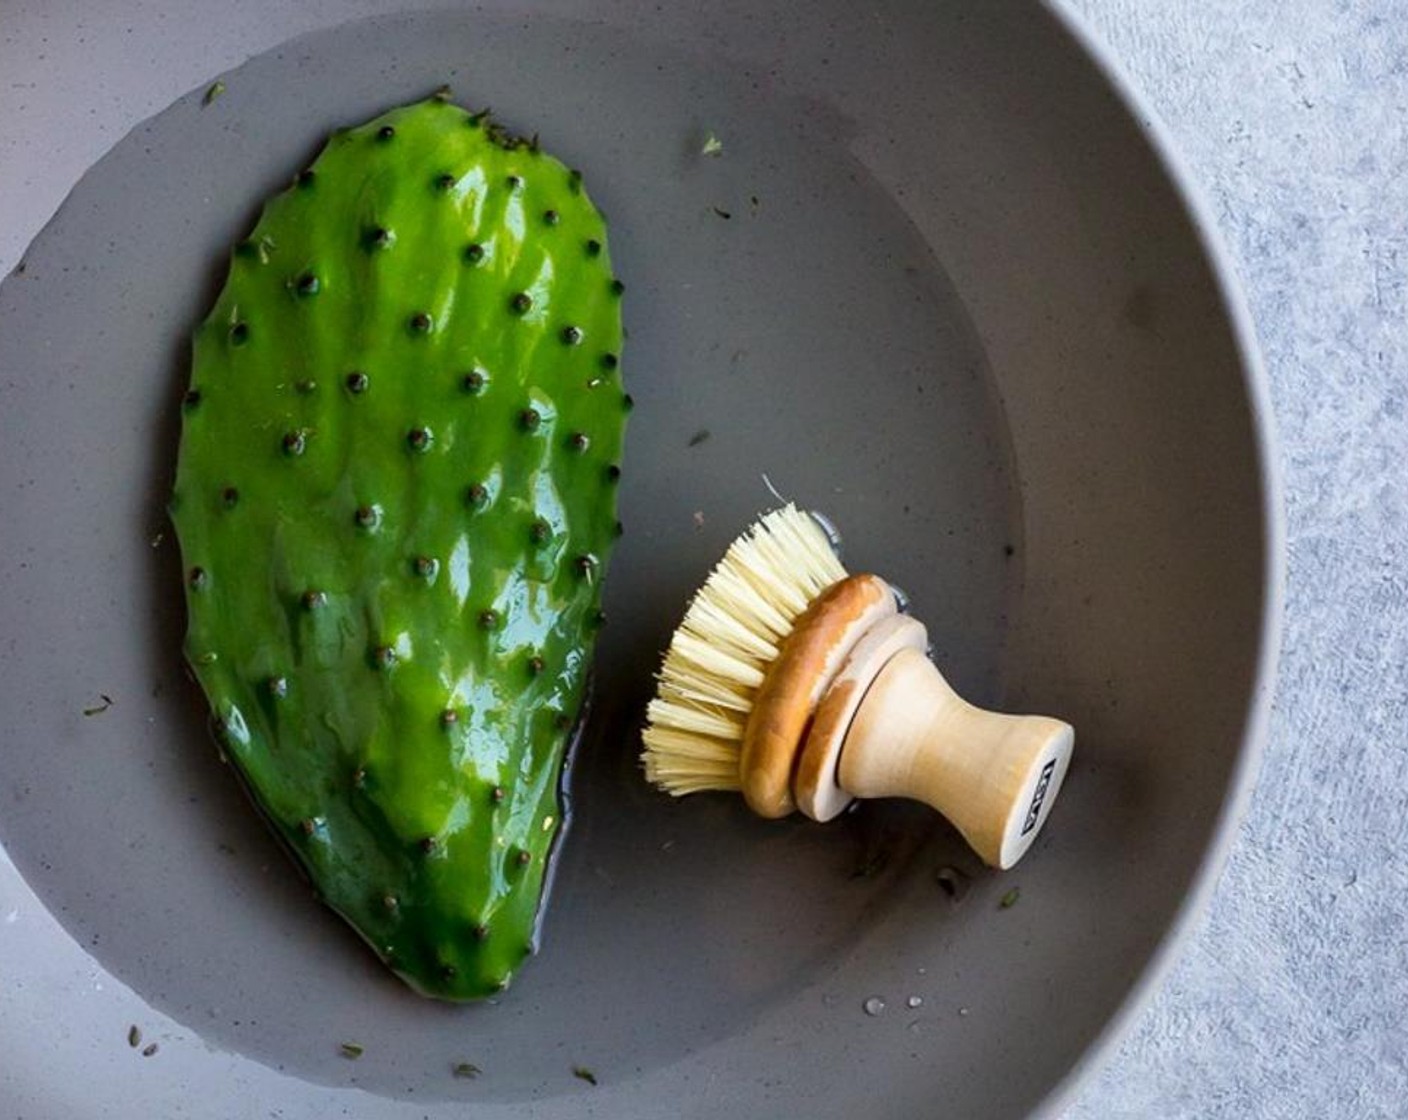 step 1 To prepare the Cactus Paddles (4), scrub them under water with a firm bristled brush. Wear a glove on the hand you are holding the paddle with to prevent yourself from getting any thorns in your fingers.